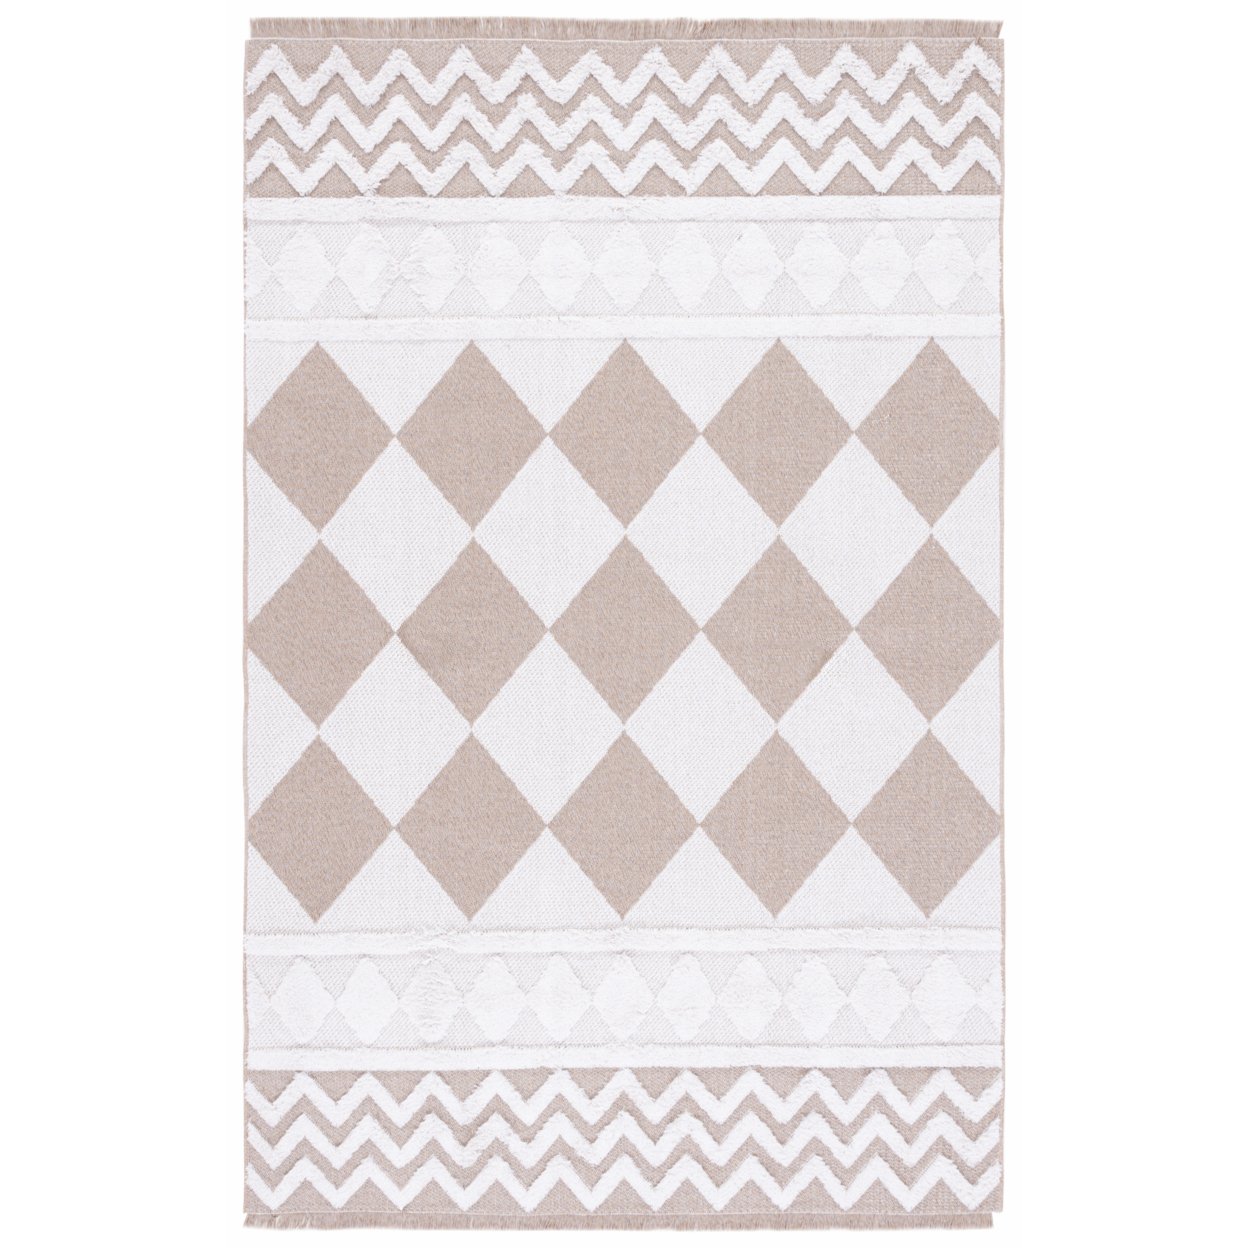 Safavieh AGT722A Augustine 700 Ivory / Beige - Ivory / Brown, 4' X 6' Rectangle